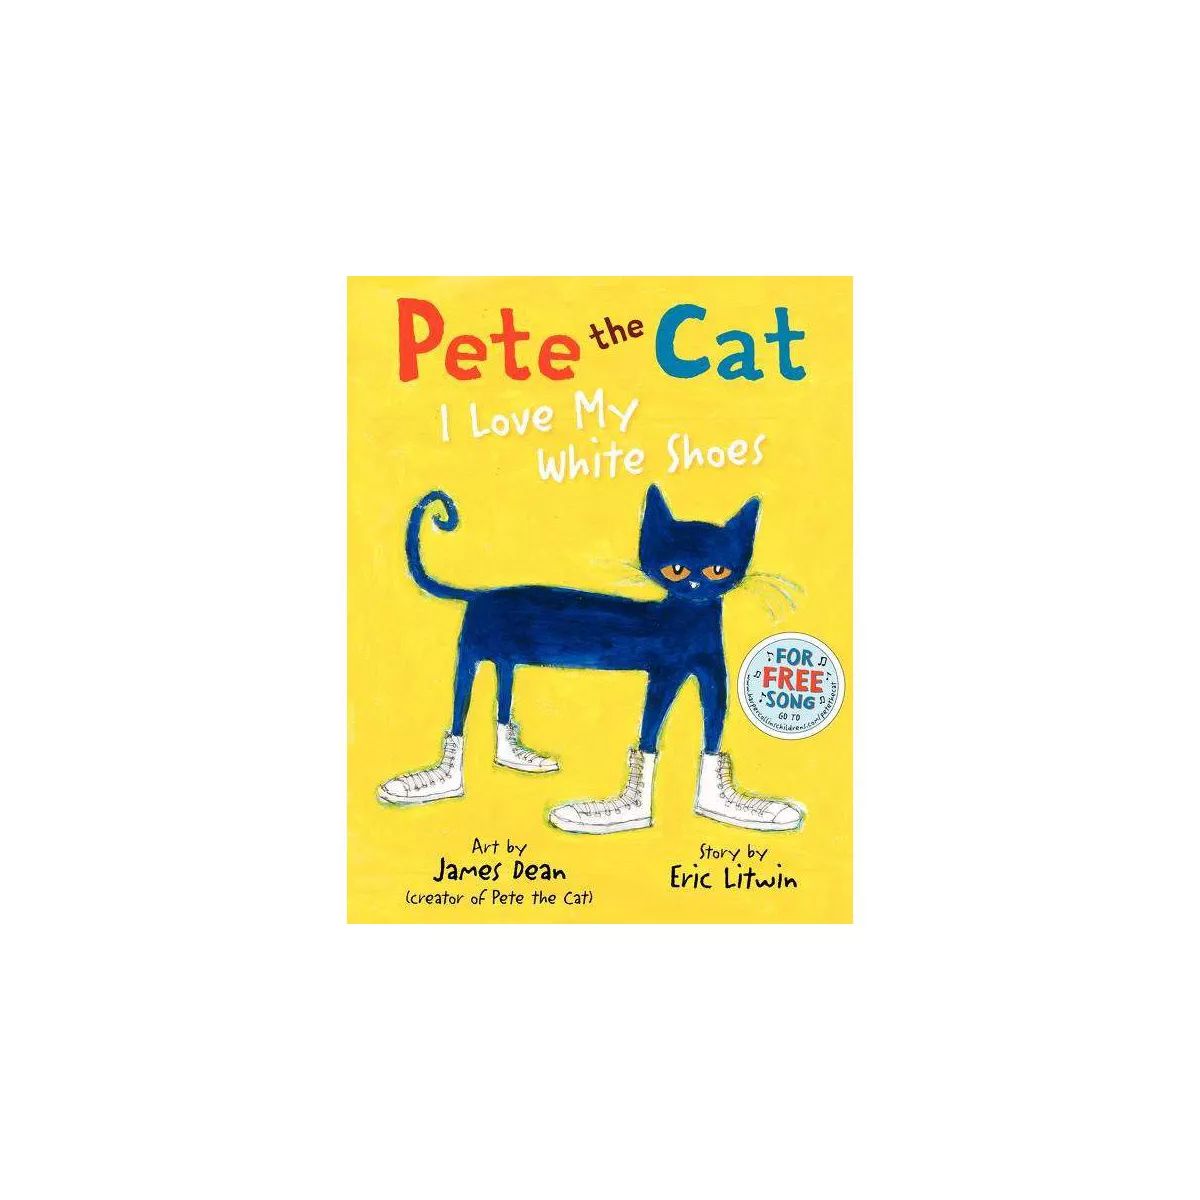 Pete the Cat: I Love My White Shoes (Hardcover) by Eric Litwin | Target